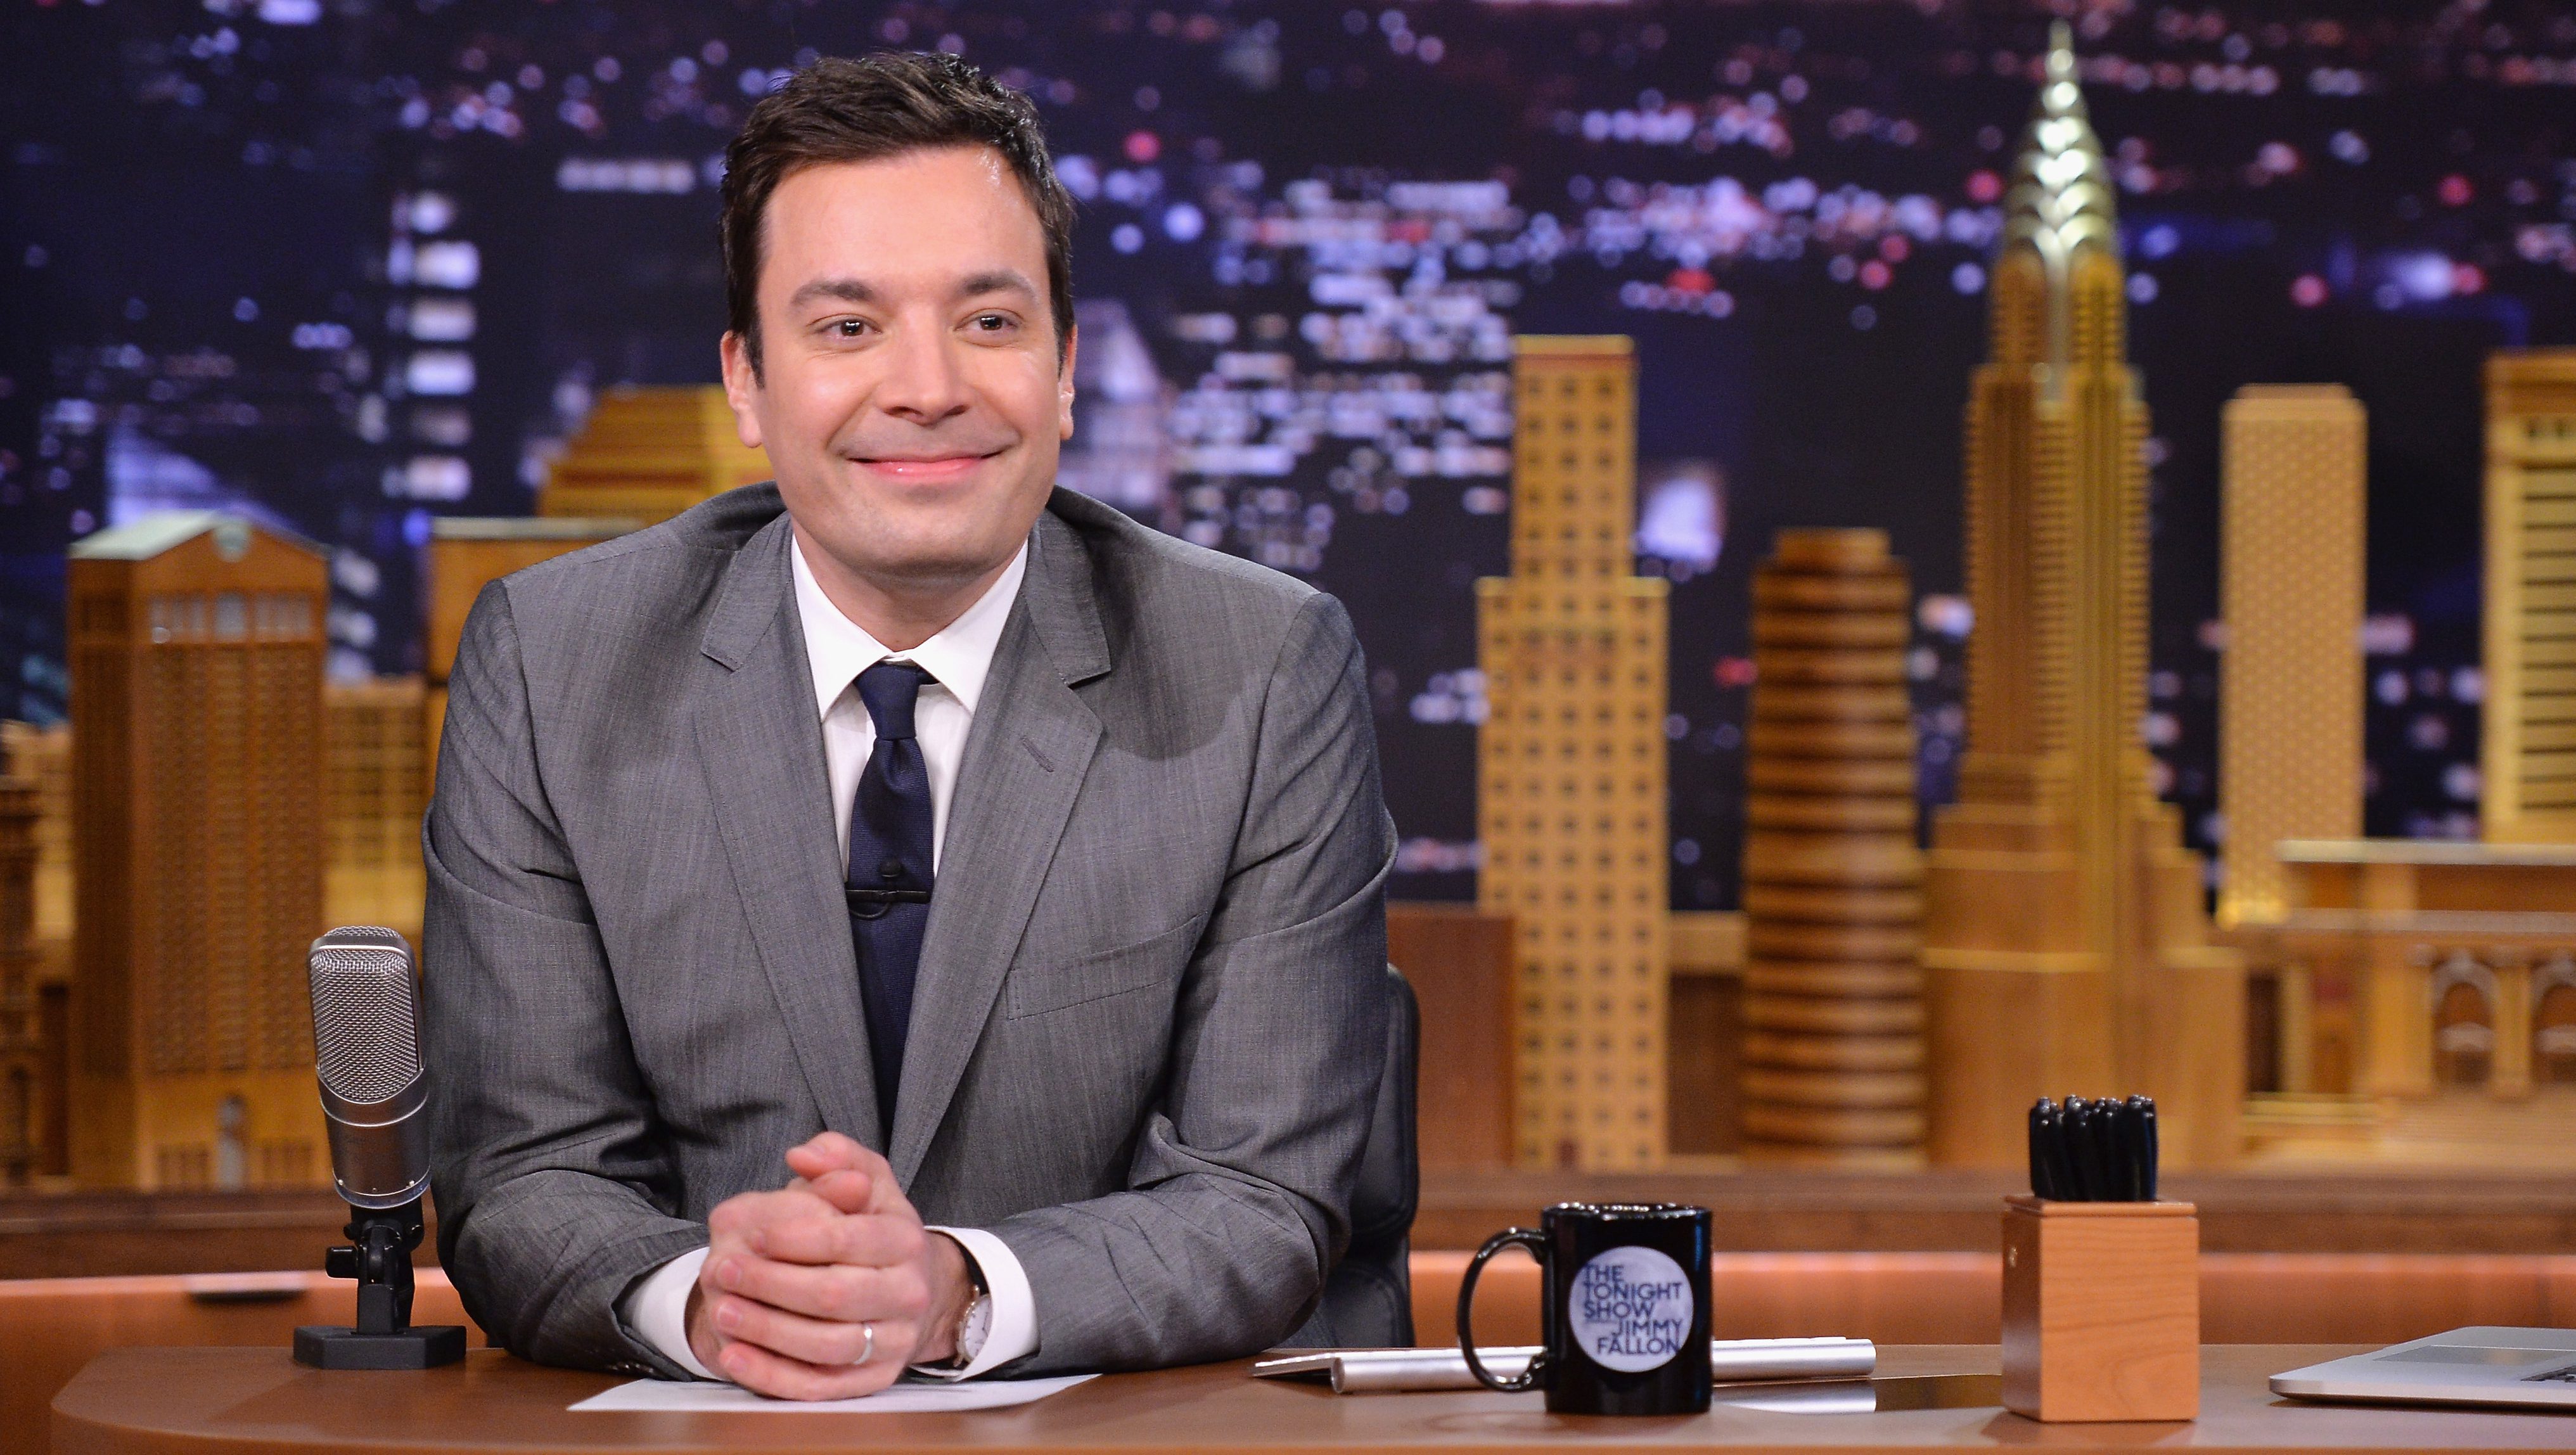 jimmy fallon guest says hello